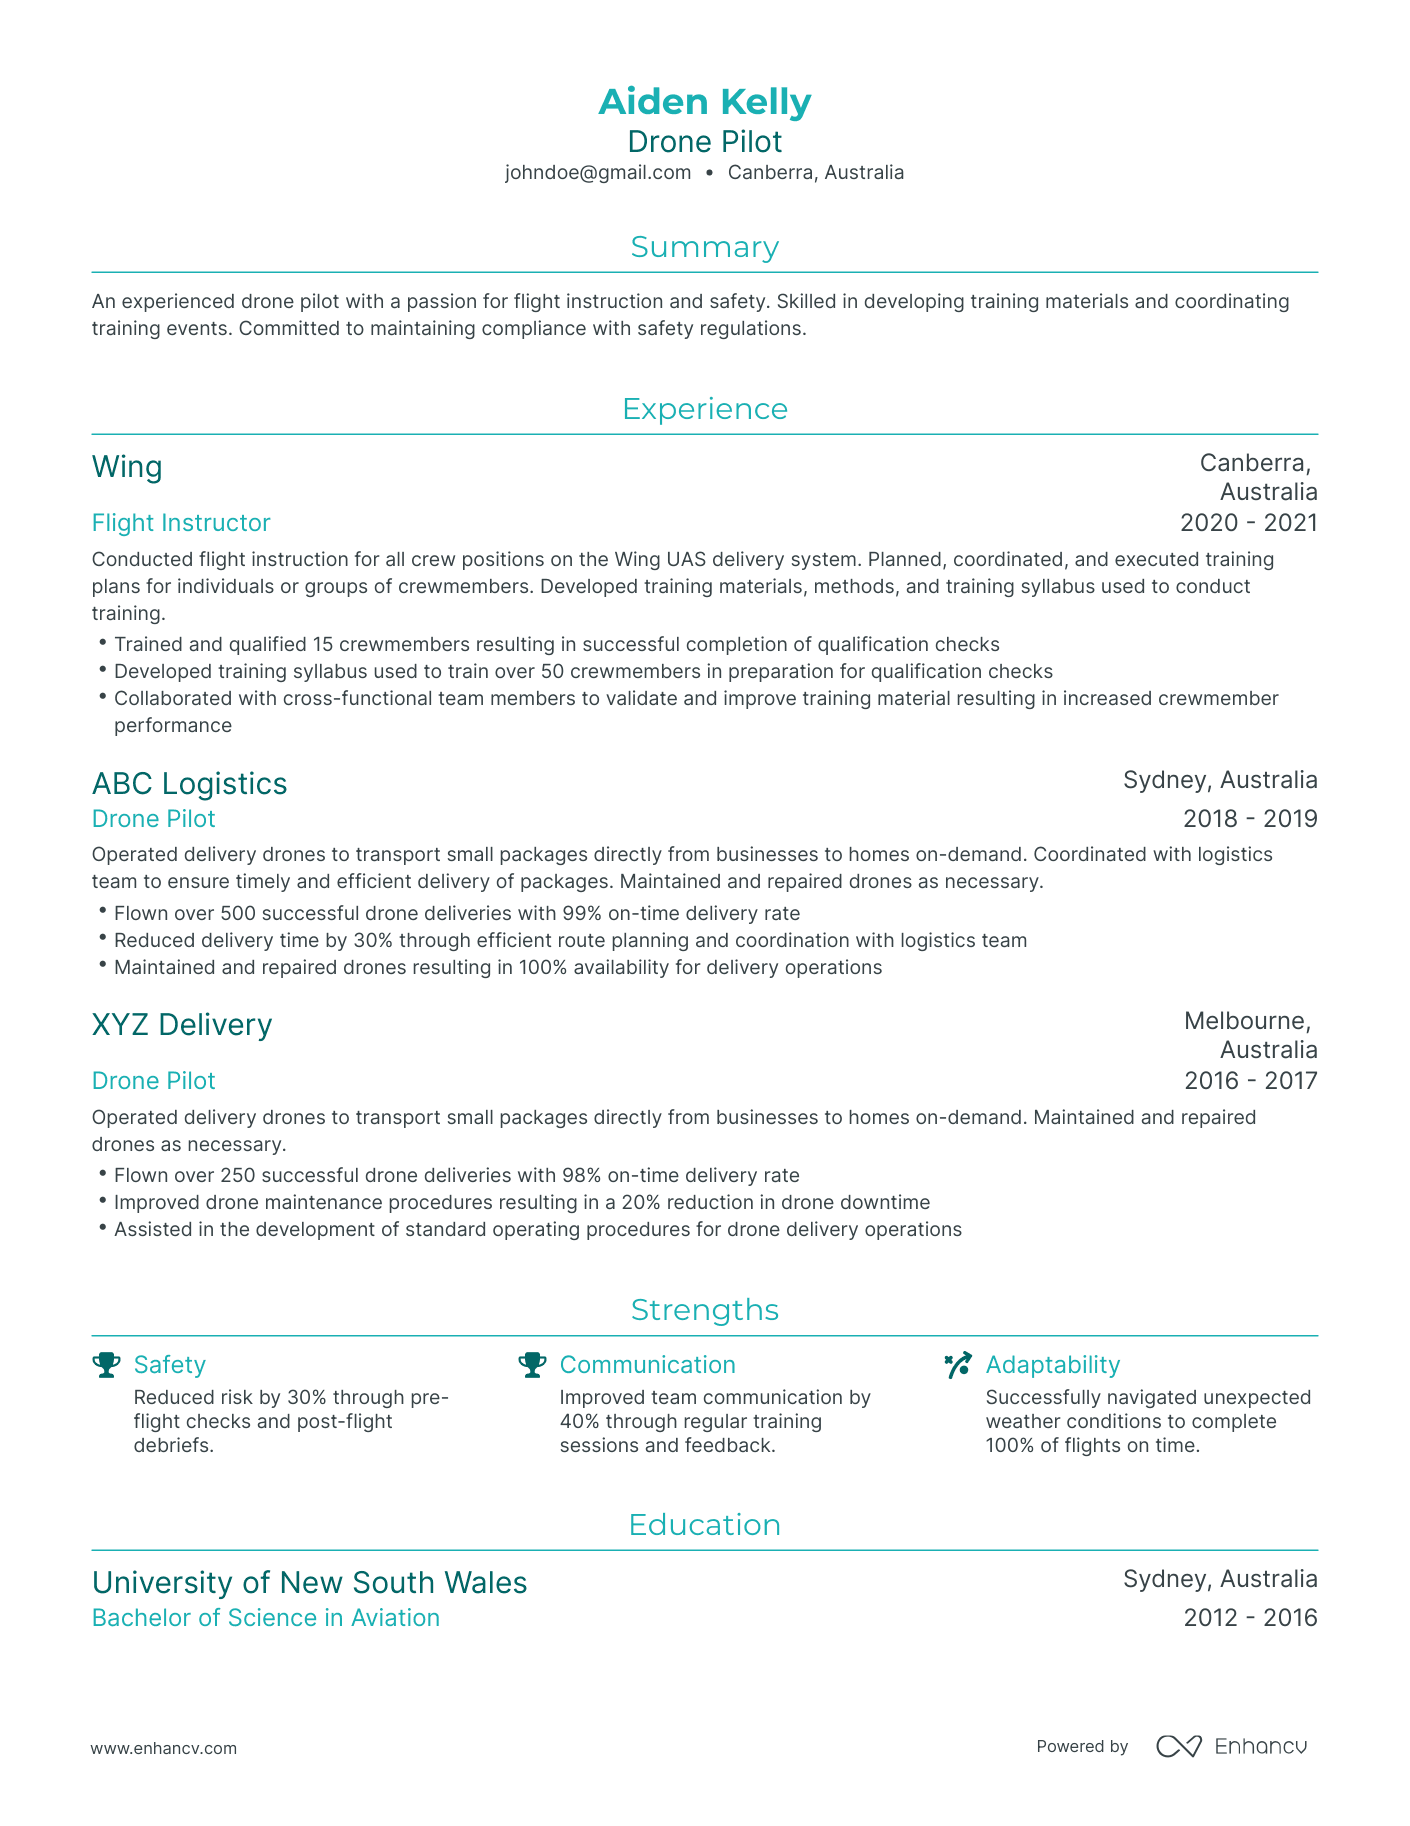 Traditional Drone Pilot Resume Template